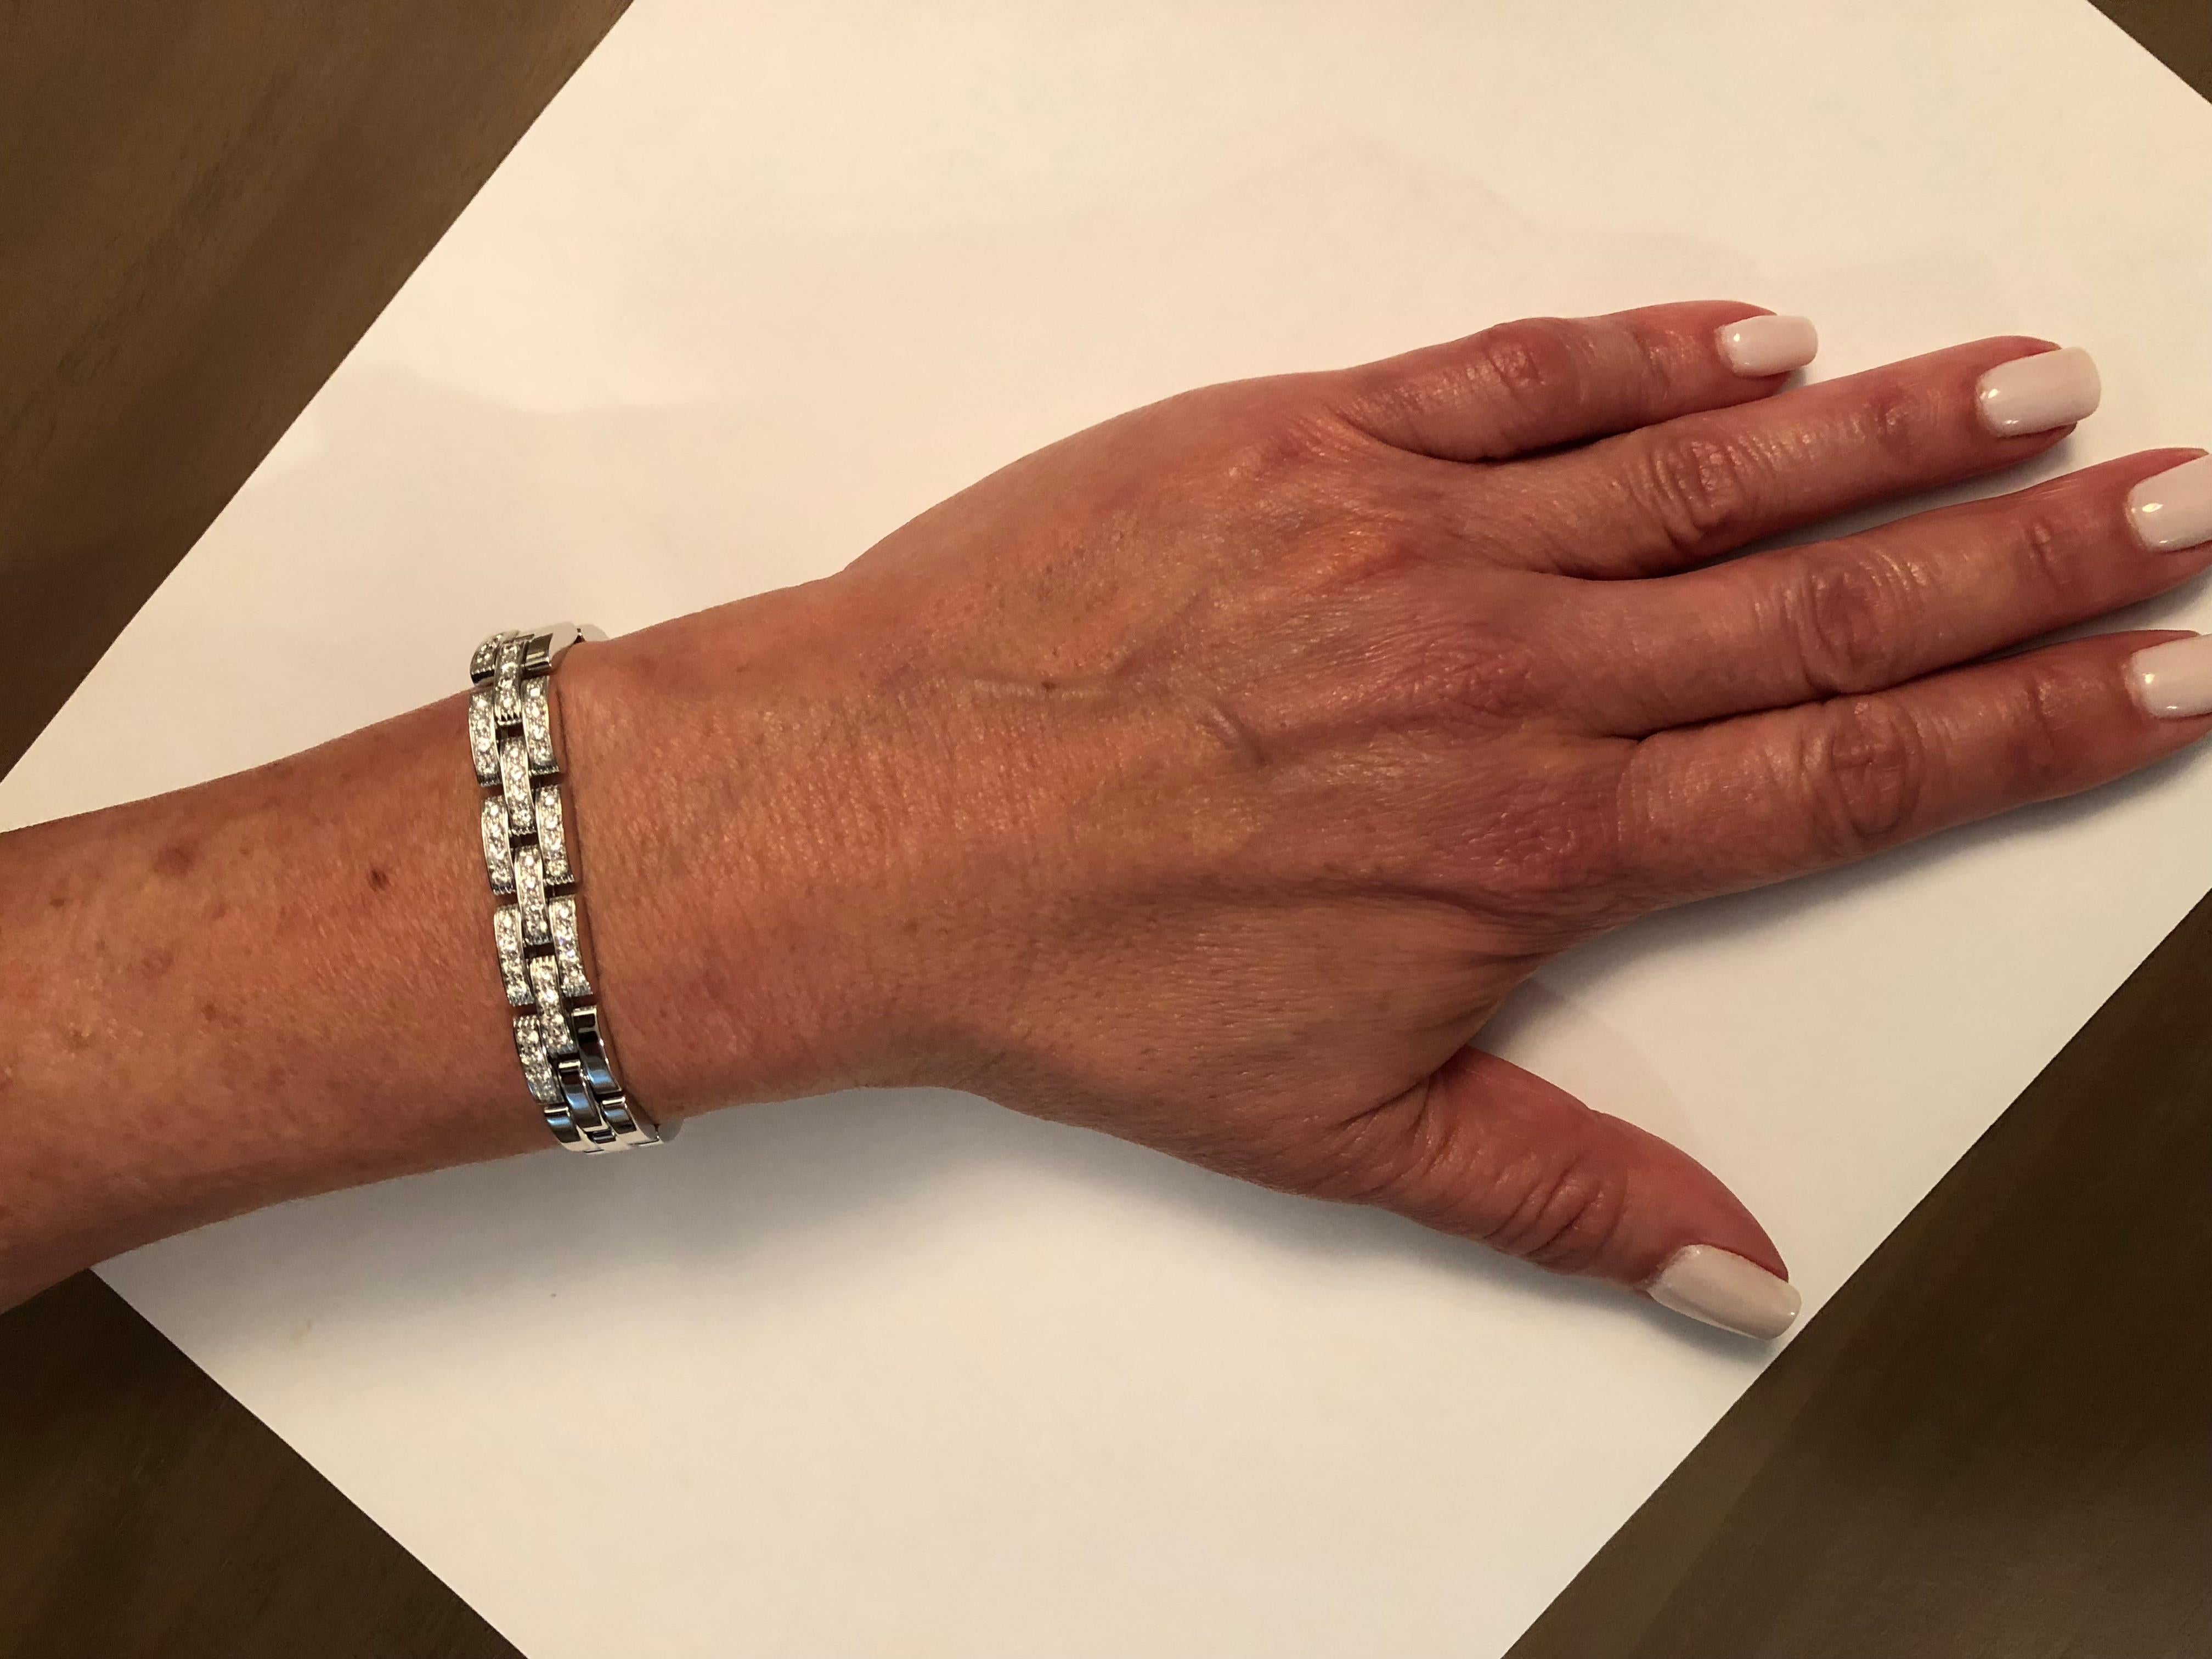 Previously owned Cartier Panthere collection bracelet.  This bracelet is 7 inches in length, made of 18 carat white gold, weighs 40.0 grams.  It also has 48 E/F color, VS clarity diamonds weighing approximately .96 carats.  It is in beautiful